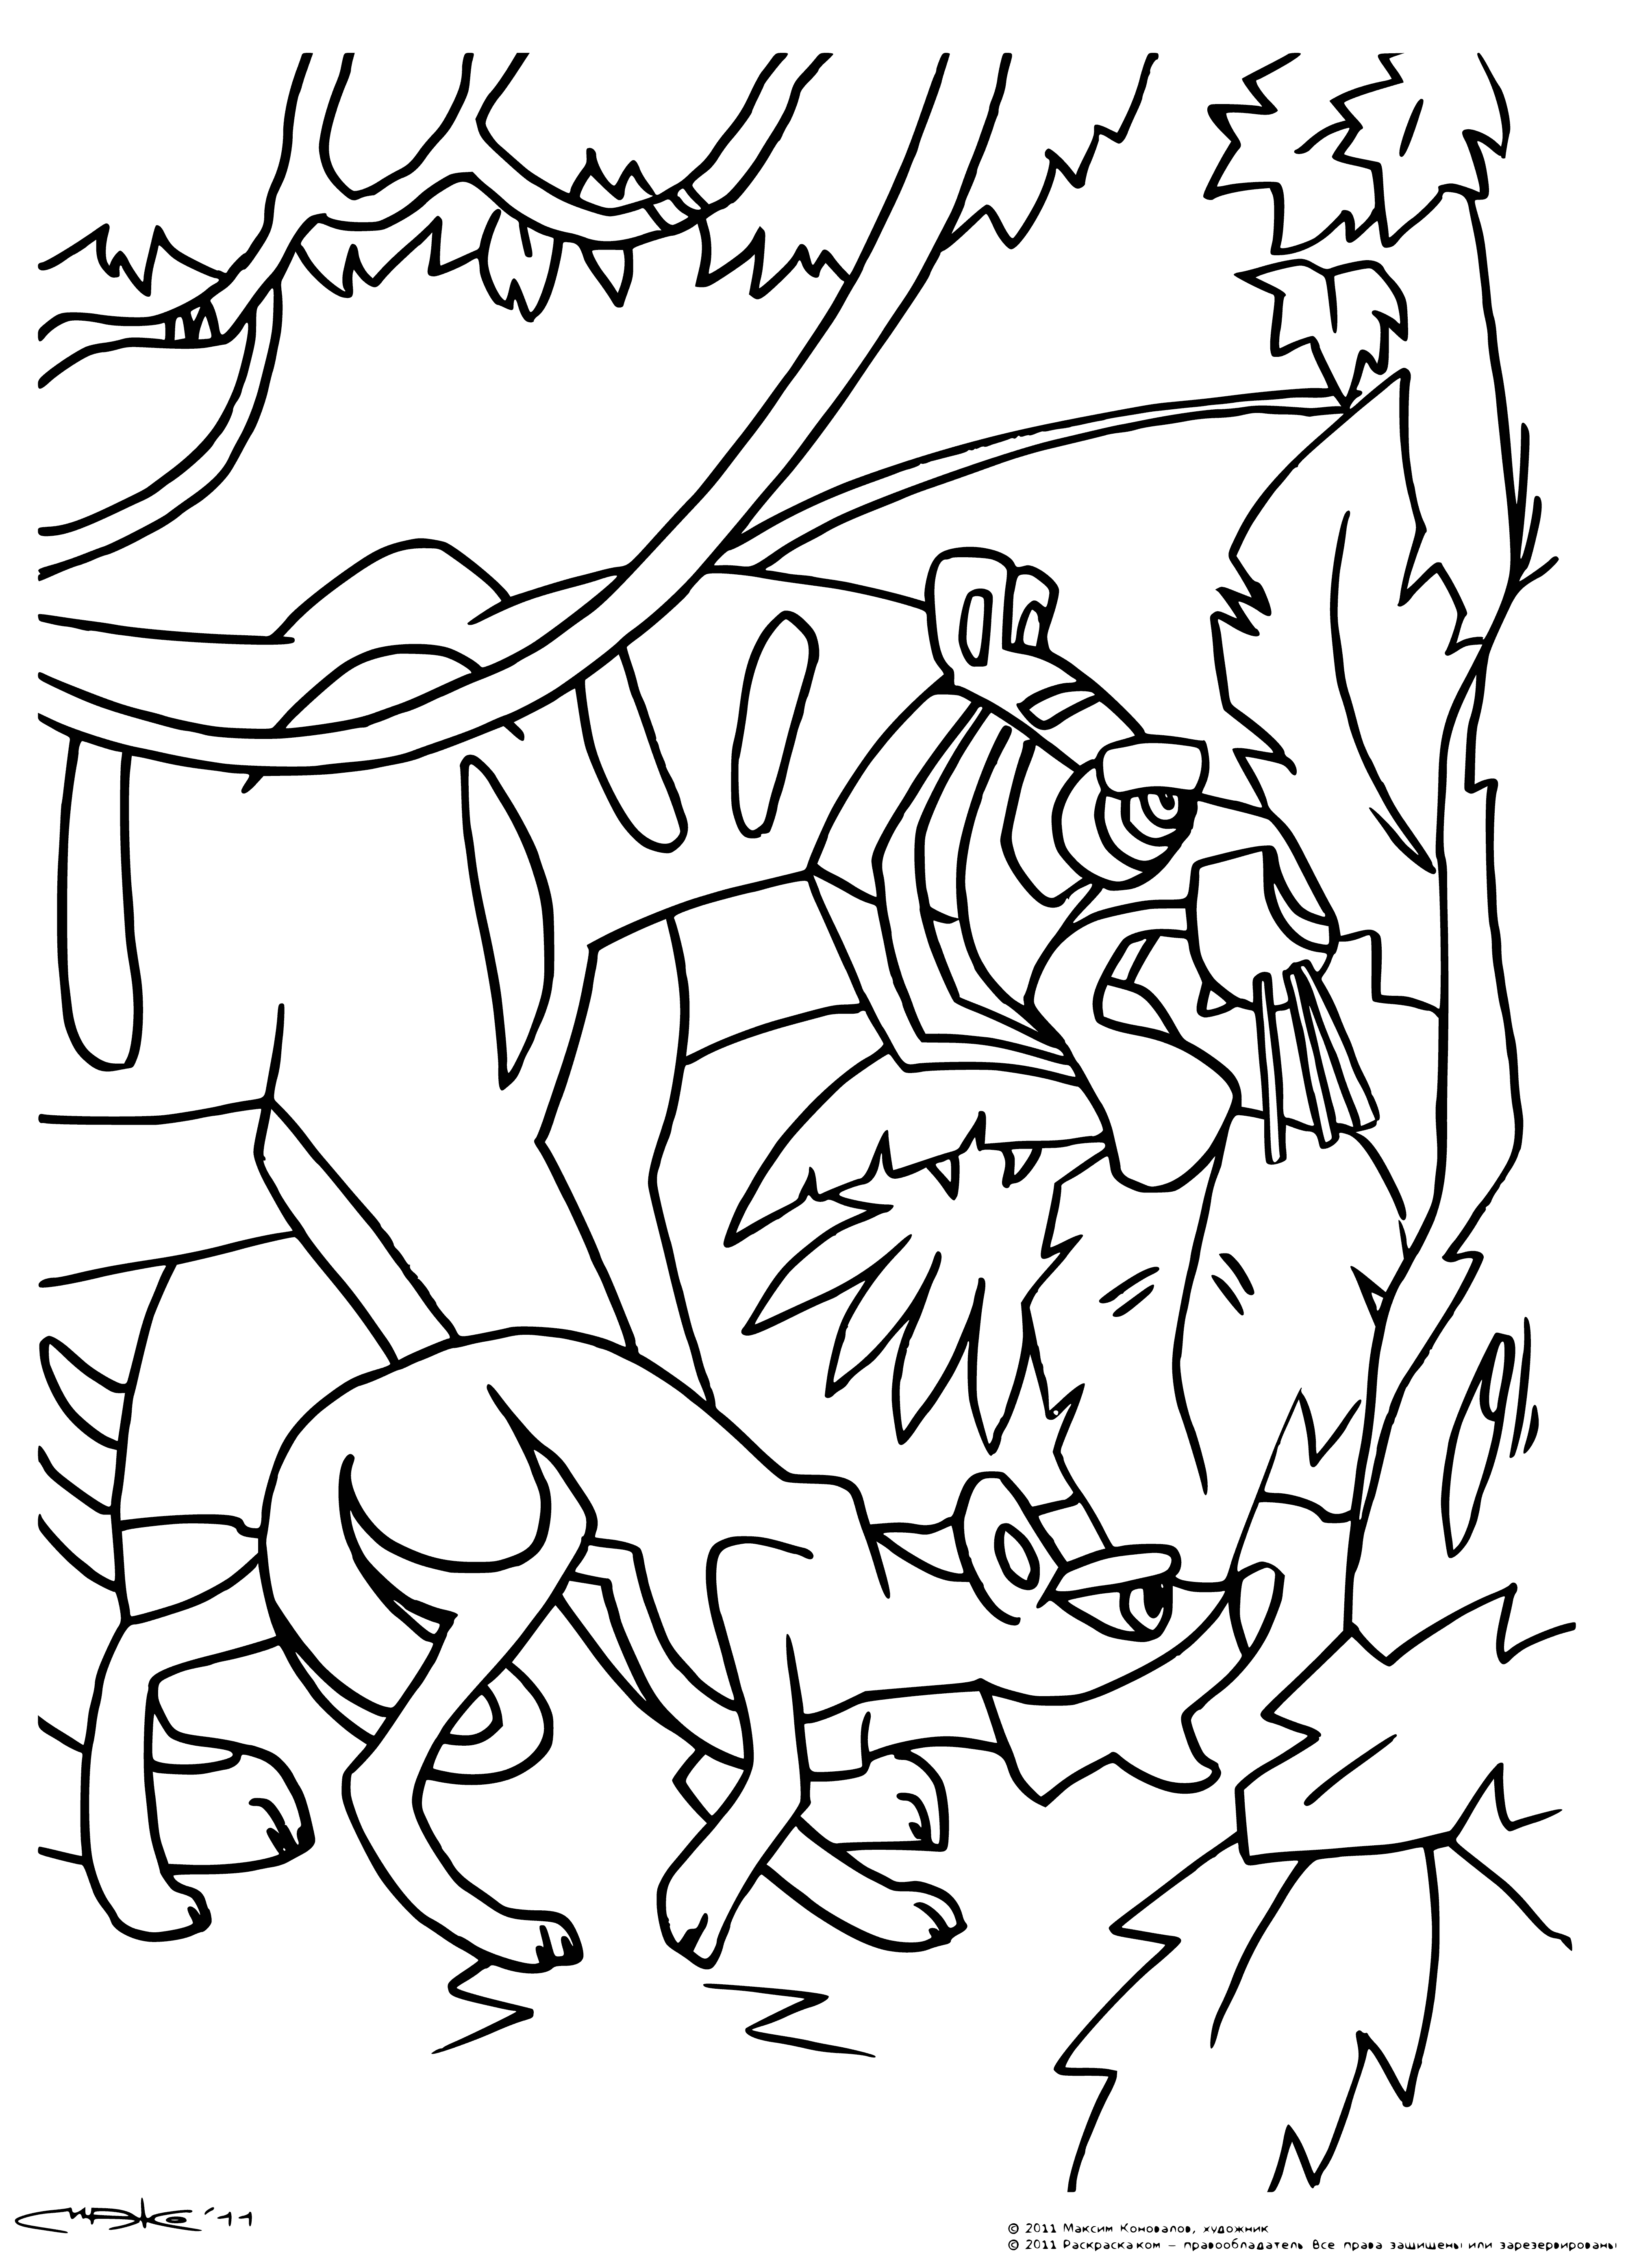 coloring page: Tigers and jackals face off in colorful scene.